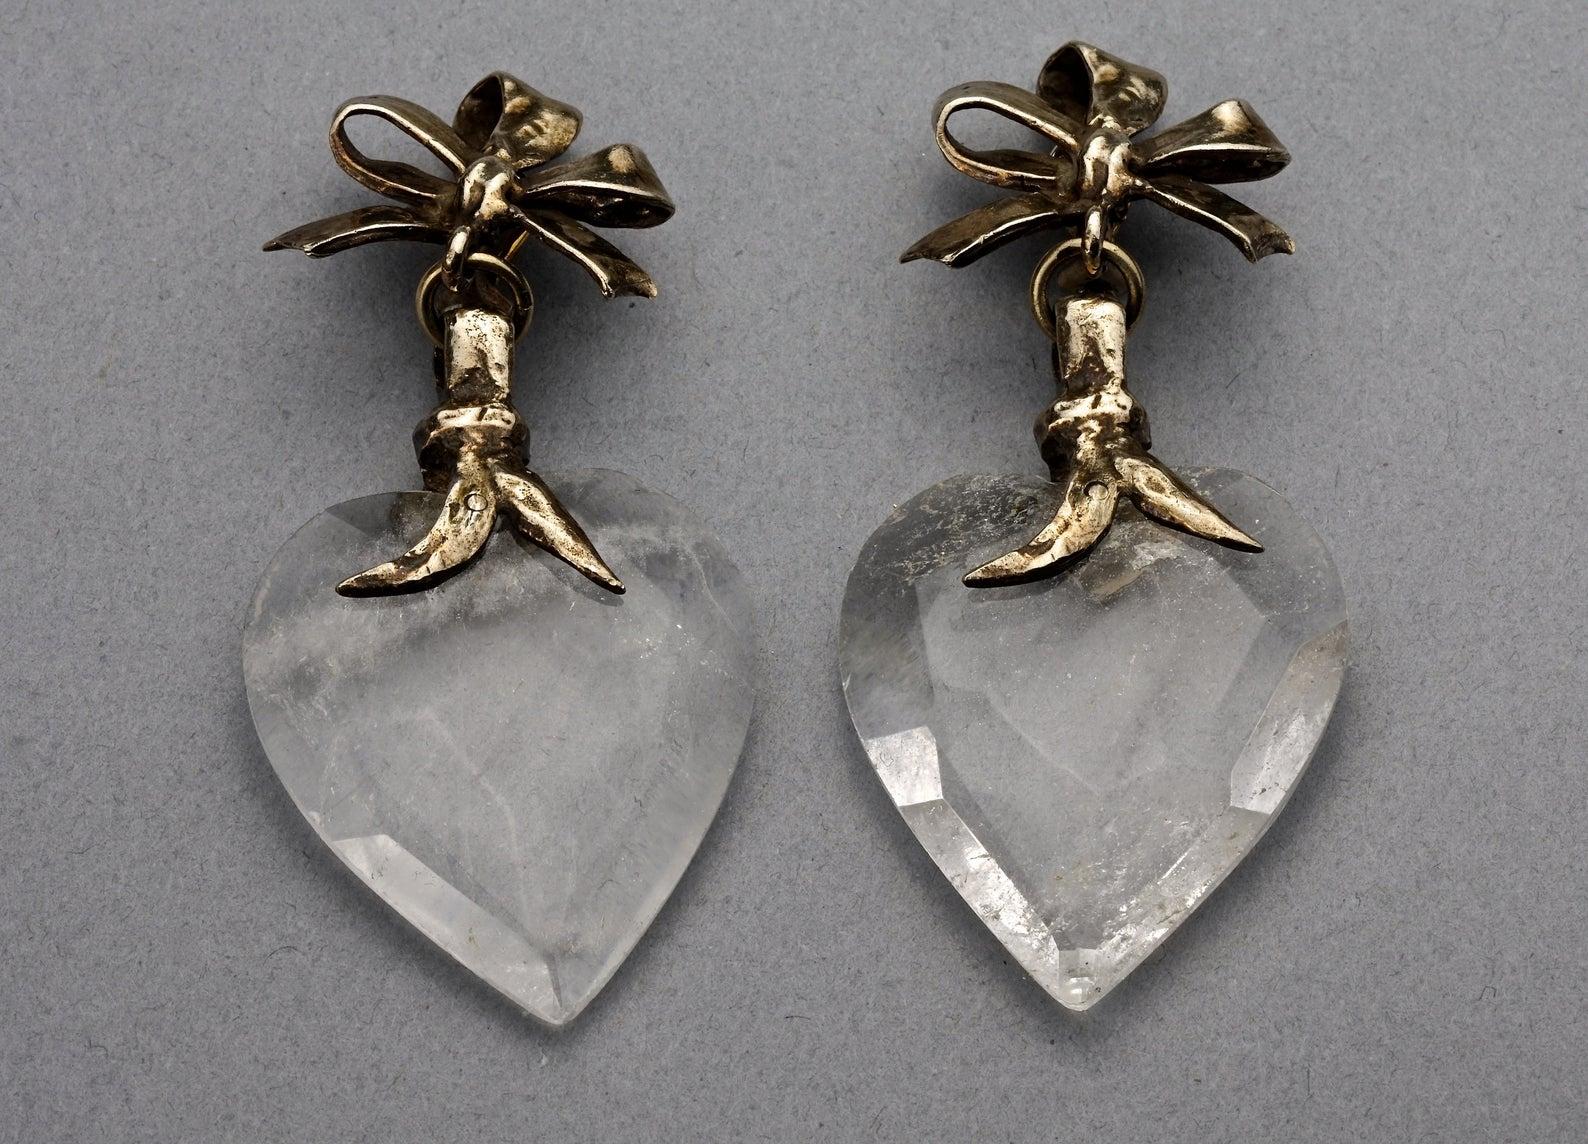 Vintage YVES SAINT LAURENT by Robert Goossens Bow Glass Heart Dangling Earrings

Measurements:
Height: 3.11 inches (7.9 cm)
Width: 1.38 inches (3.5 cm)
Weight: 23 grams

Features:
- 100% Authentic YVES SAINT LAURENT.
- Bow gilt metal with dangling